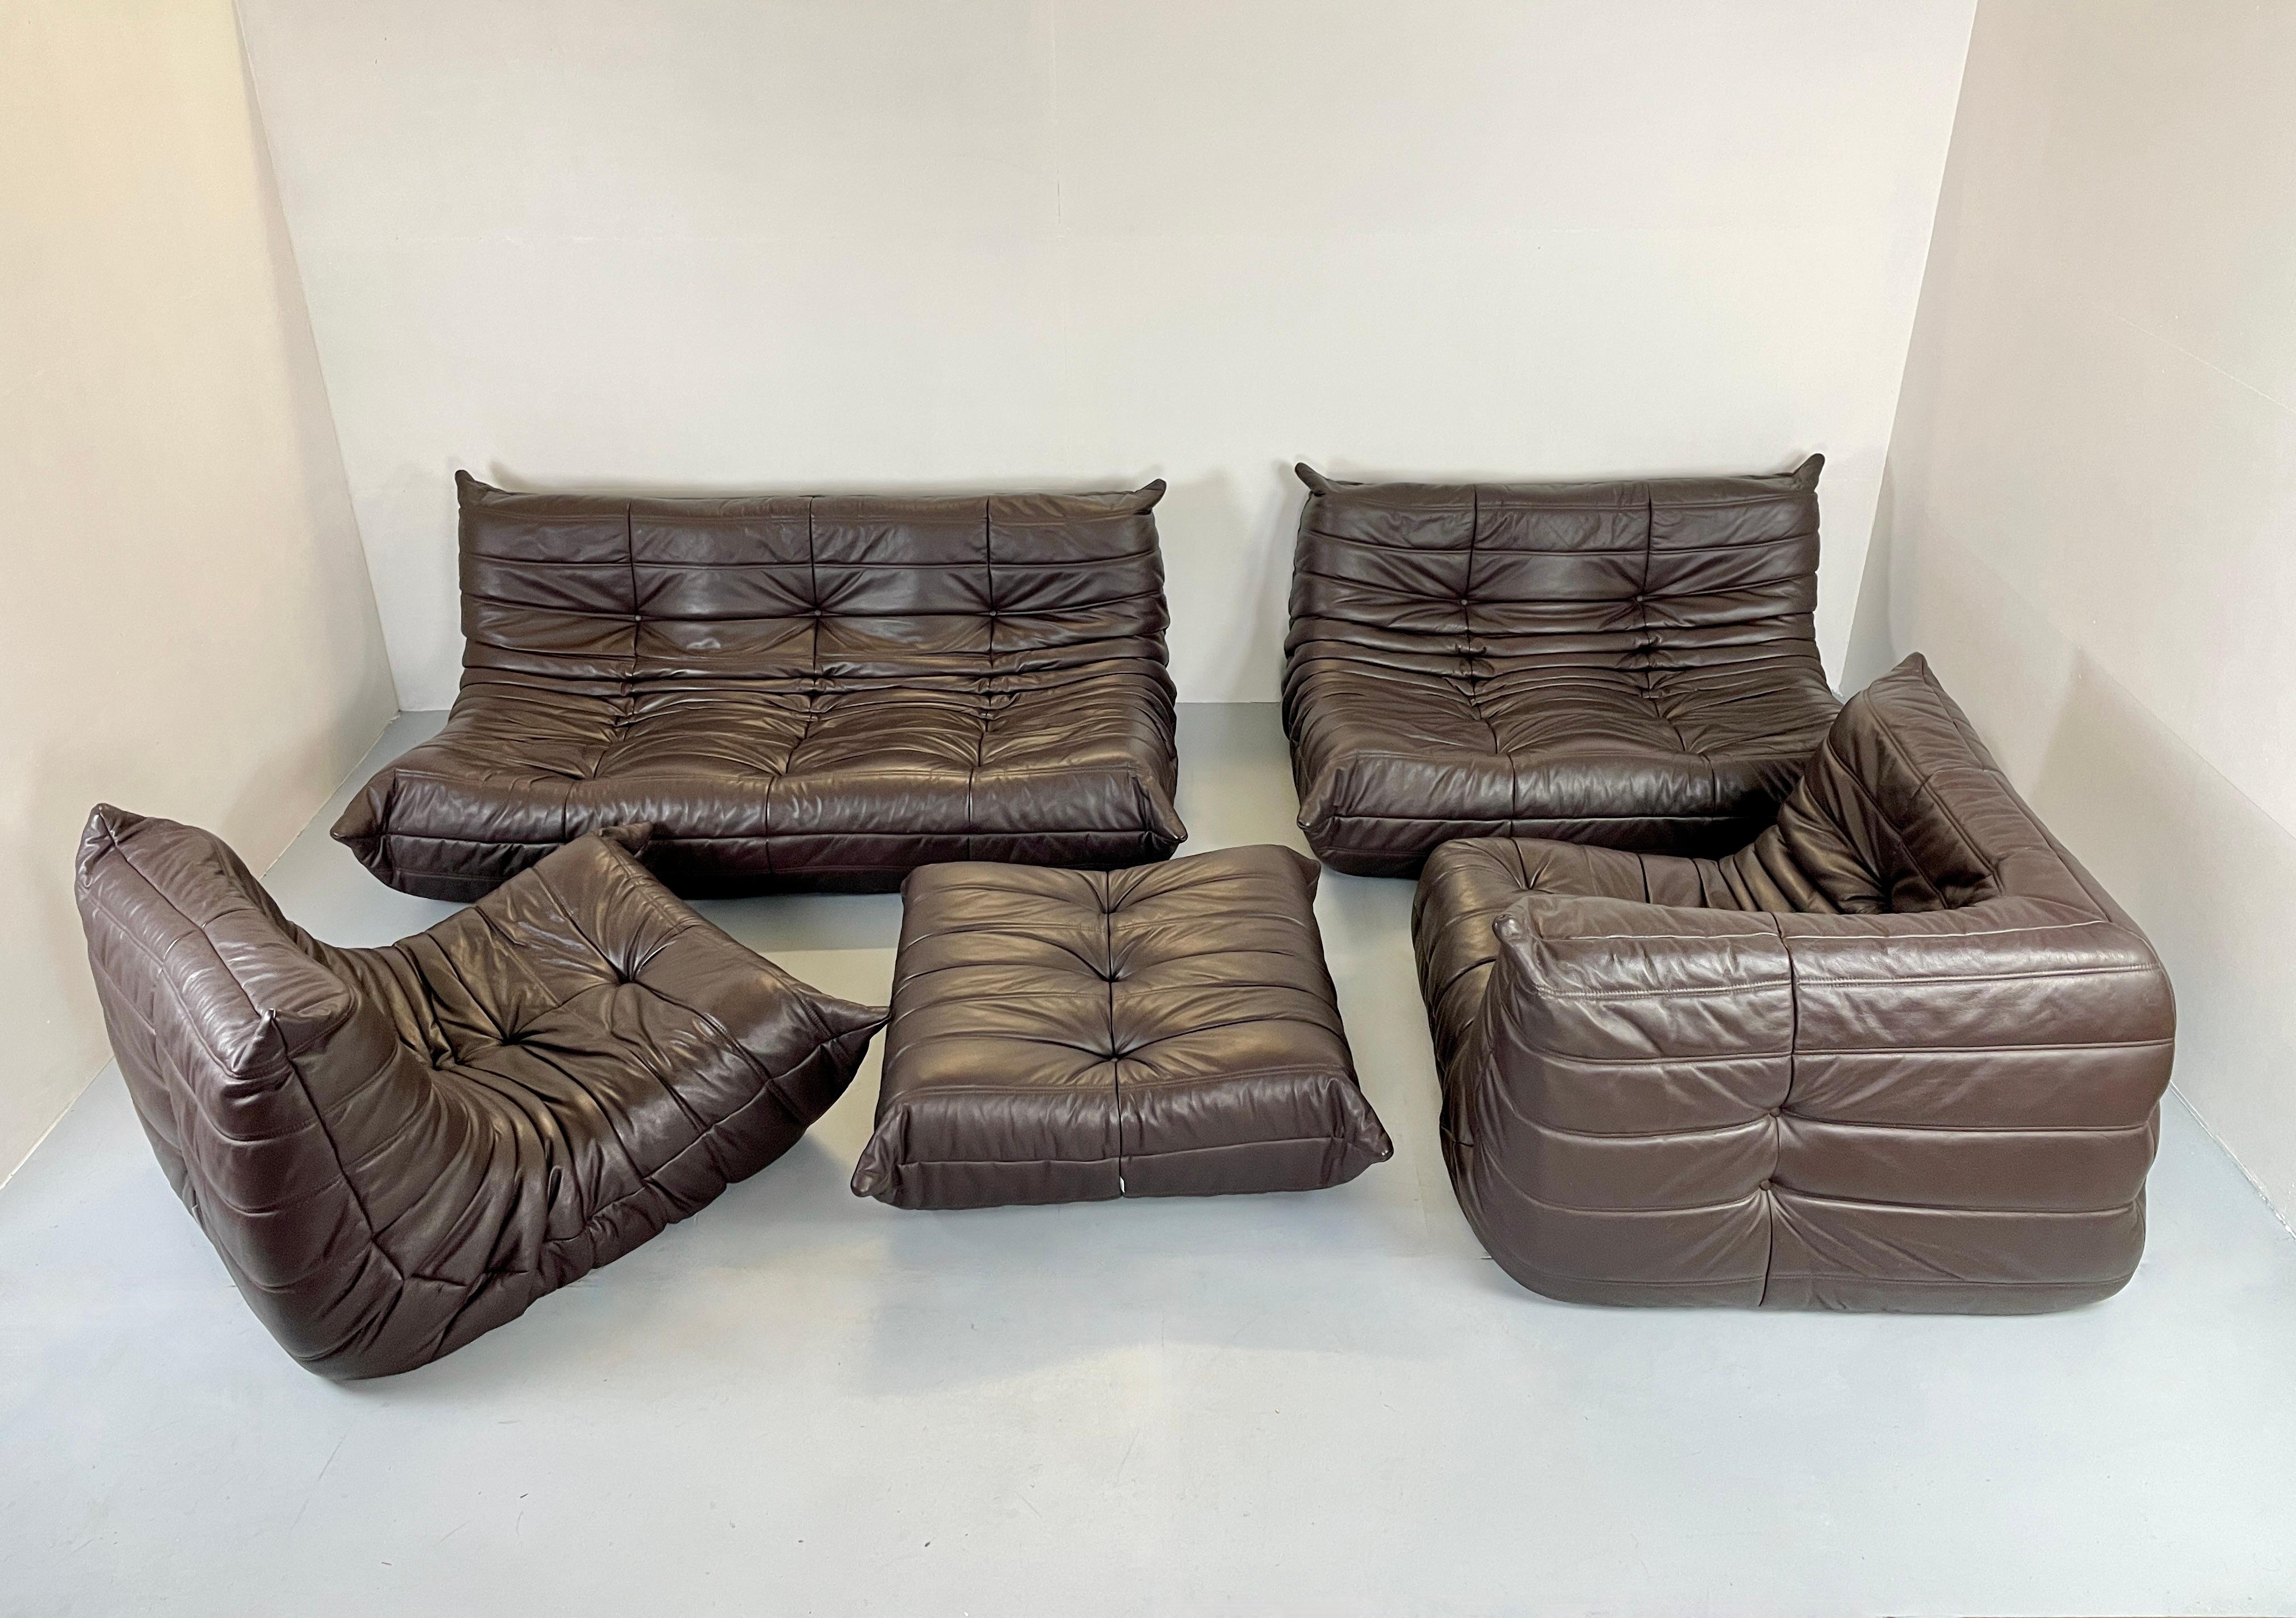 This iconic set offers an unique seating comfort. It is a design by Michel Ducaroy for Ligne Roset. 

This large modular set is can be configured into one large corner sofa or split for a multitude of seating arrangements. 

The color of the